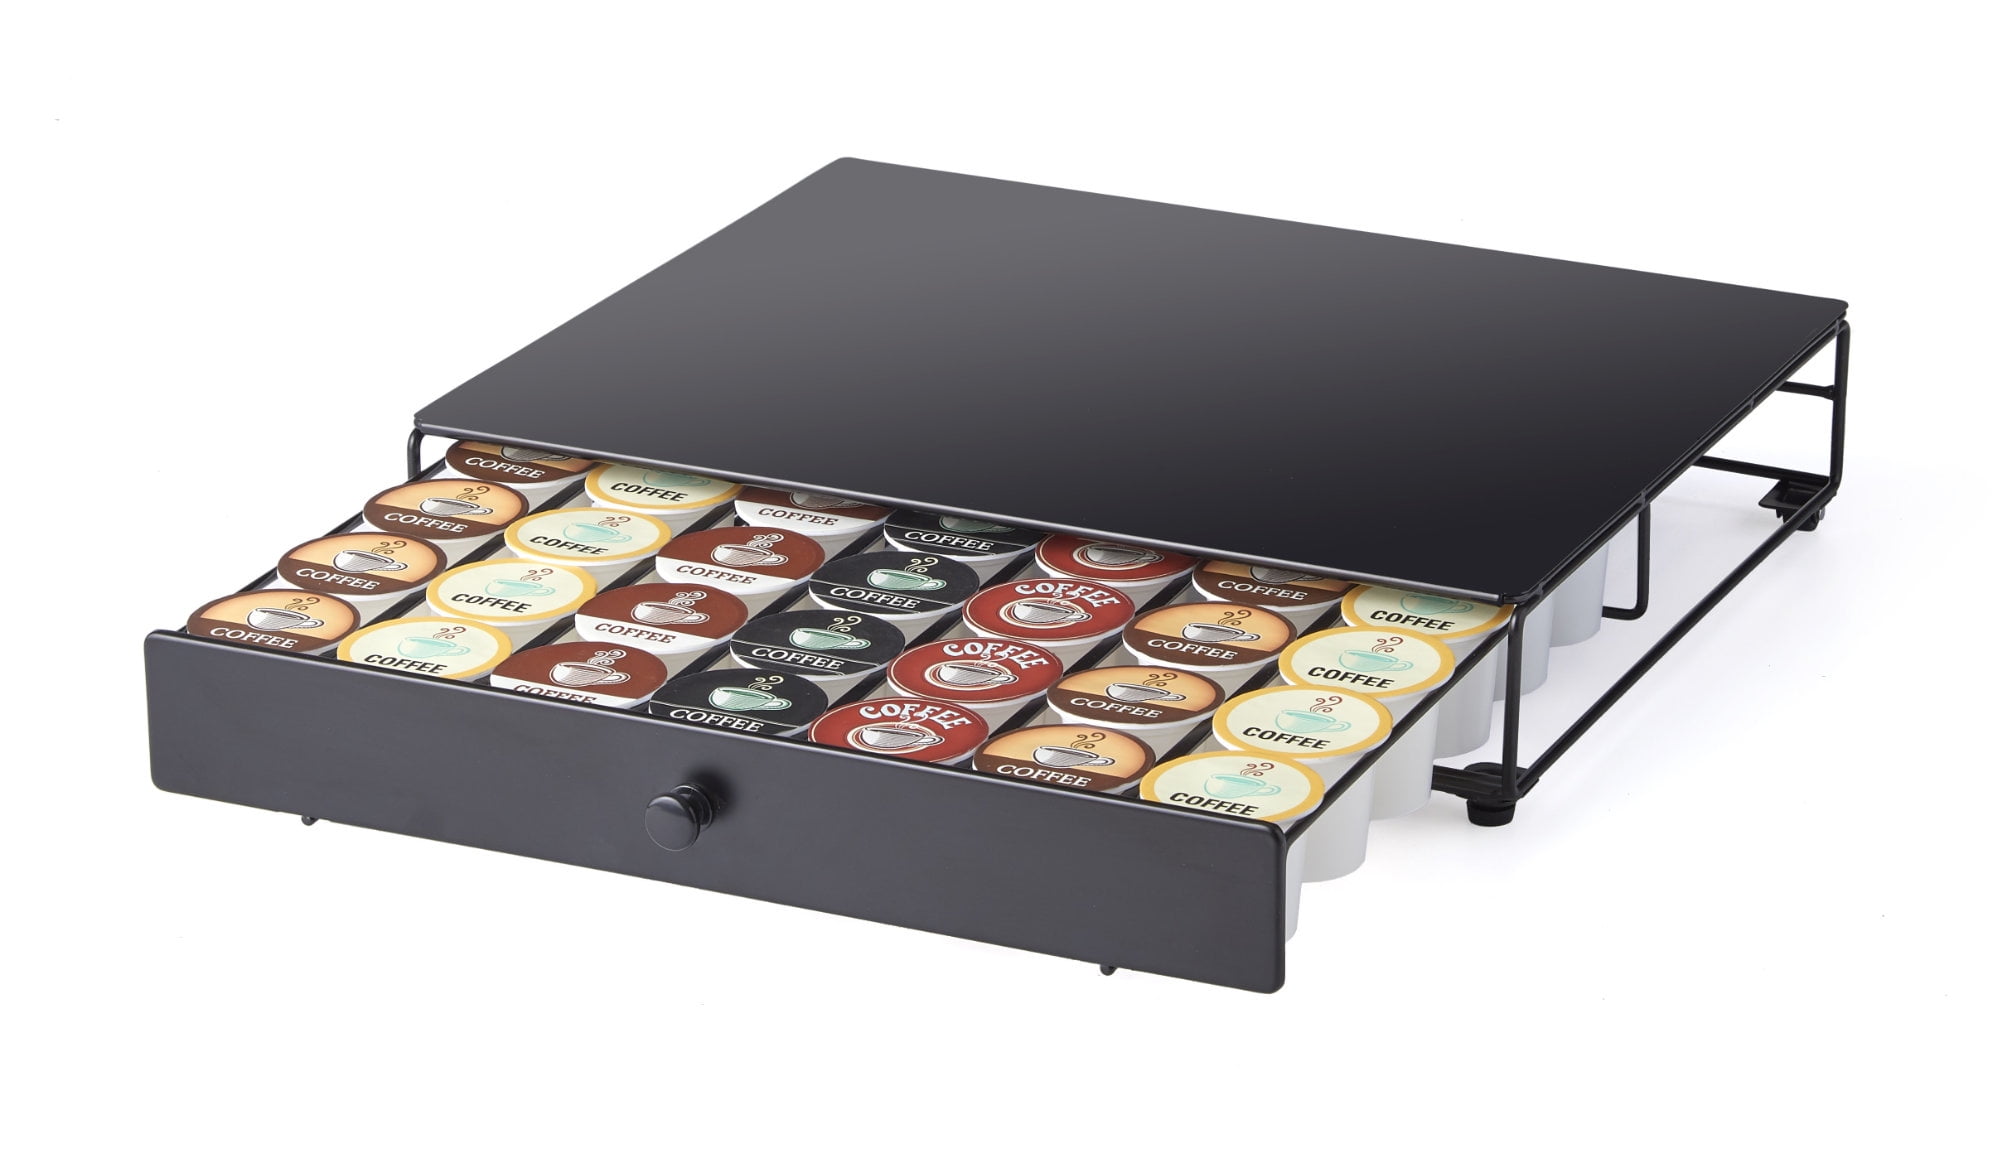  YCICI Coffee Pod Drawer Holder for K cup, Coffee Pod Drawer  Holder Organizer, No Assembly Required, K Cup Holder with 36 Capacity  Capsule Pods. Suit for Home Office,Kitchen,Cafe Counter. (Black) 